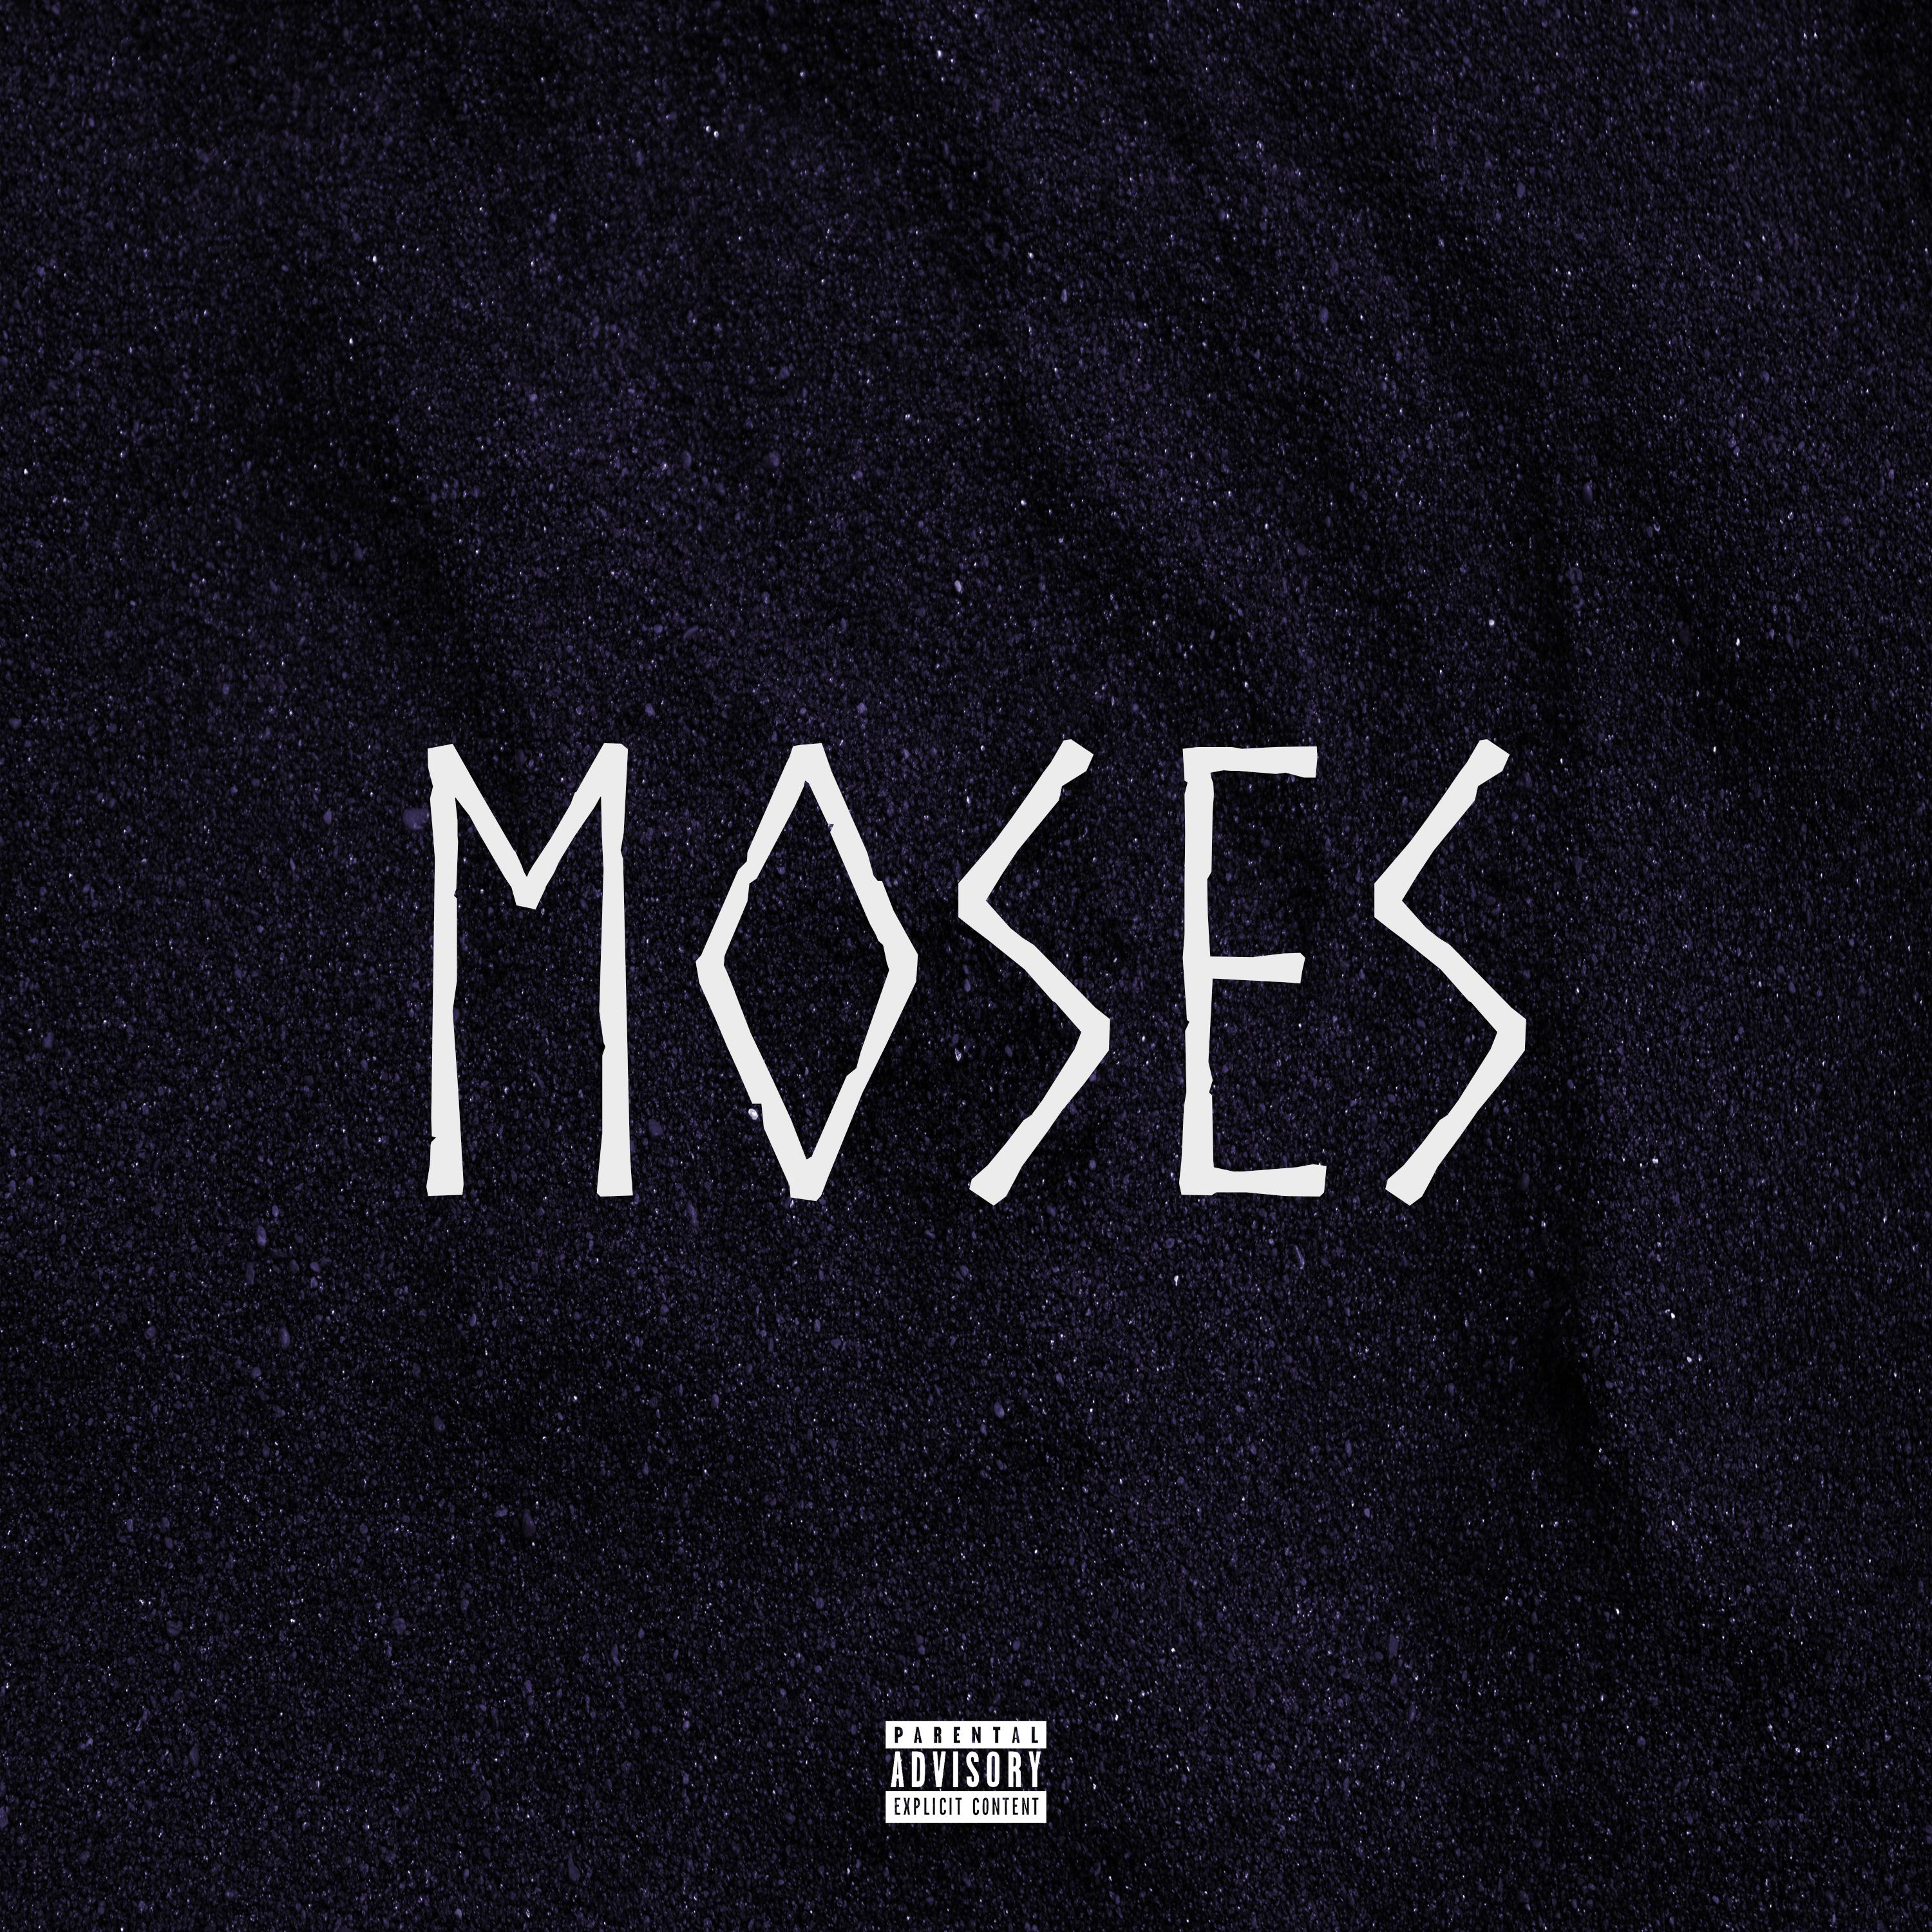 796 - Moses